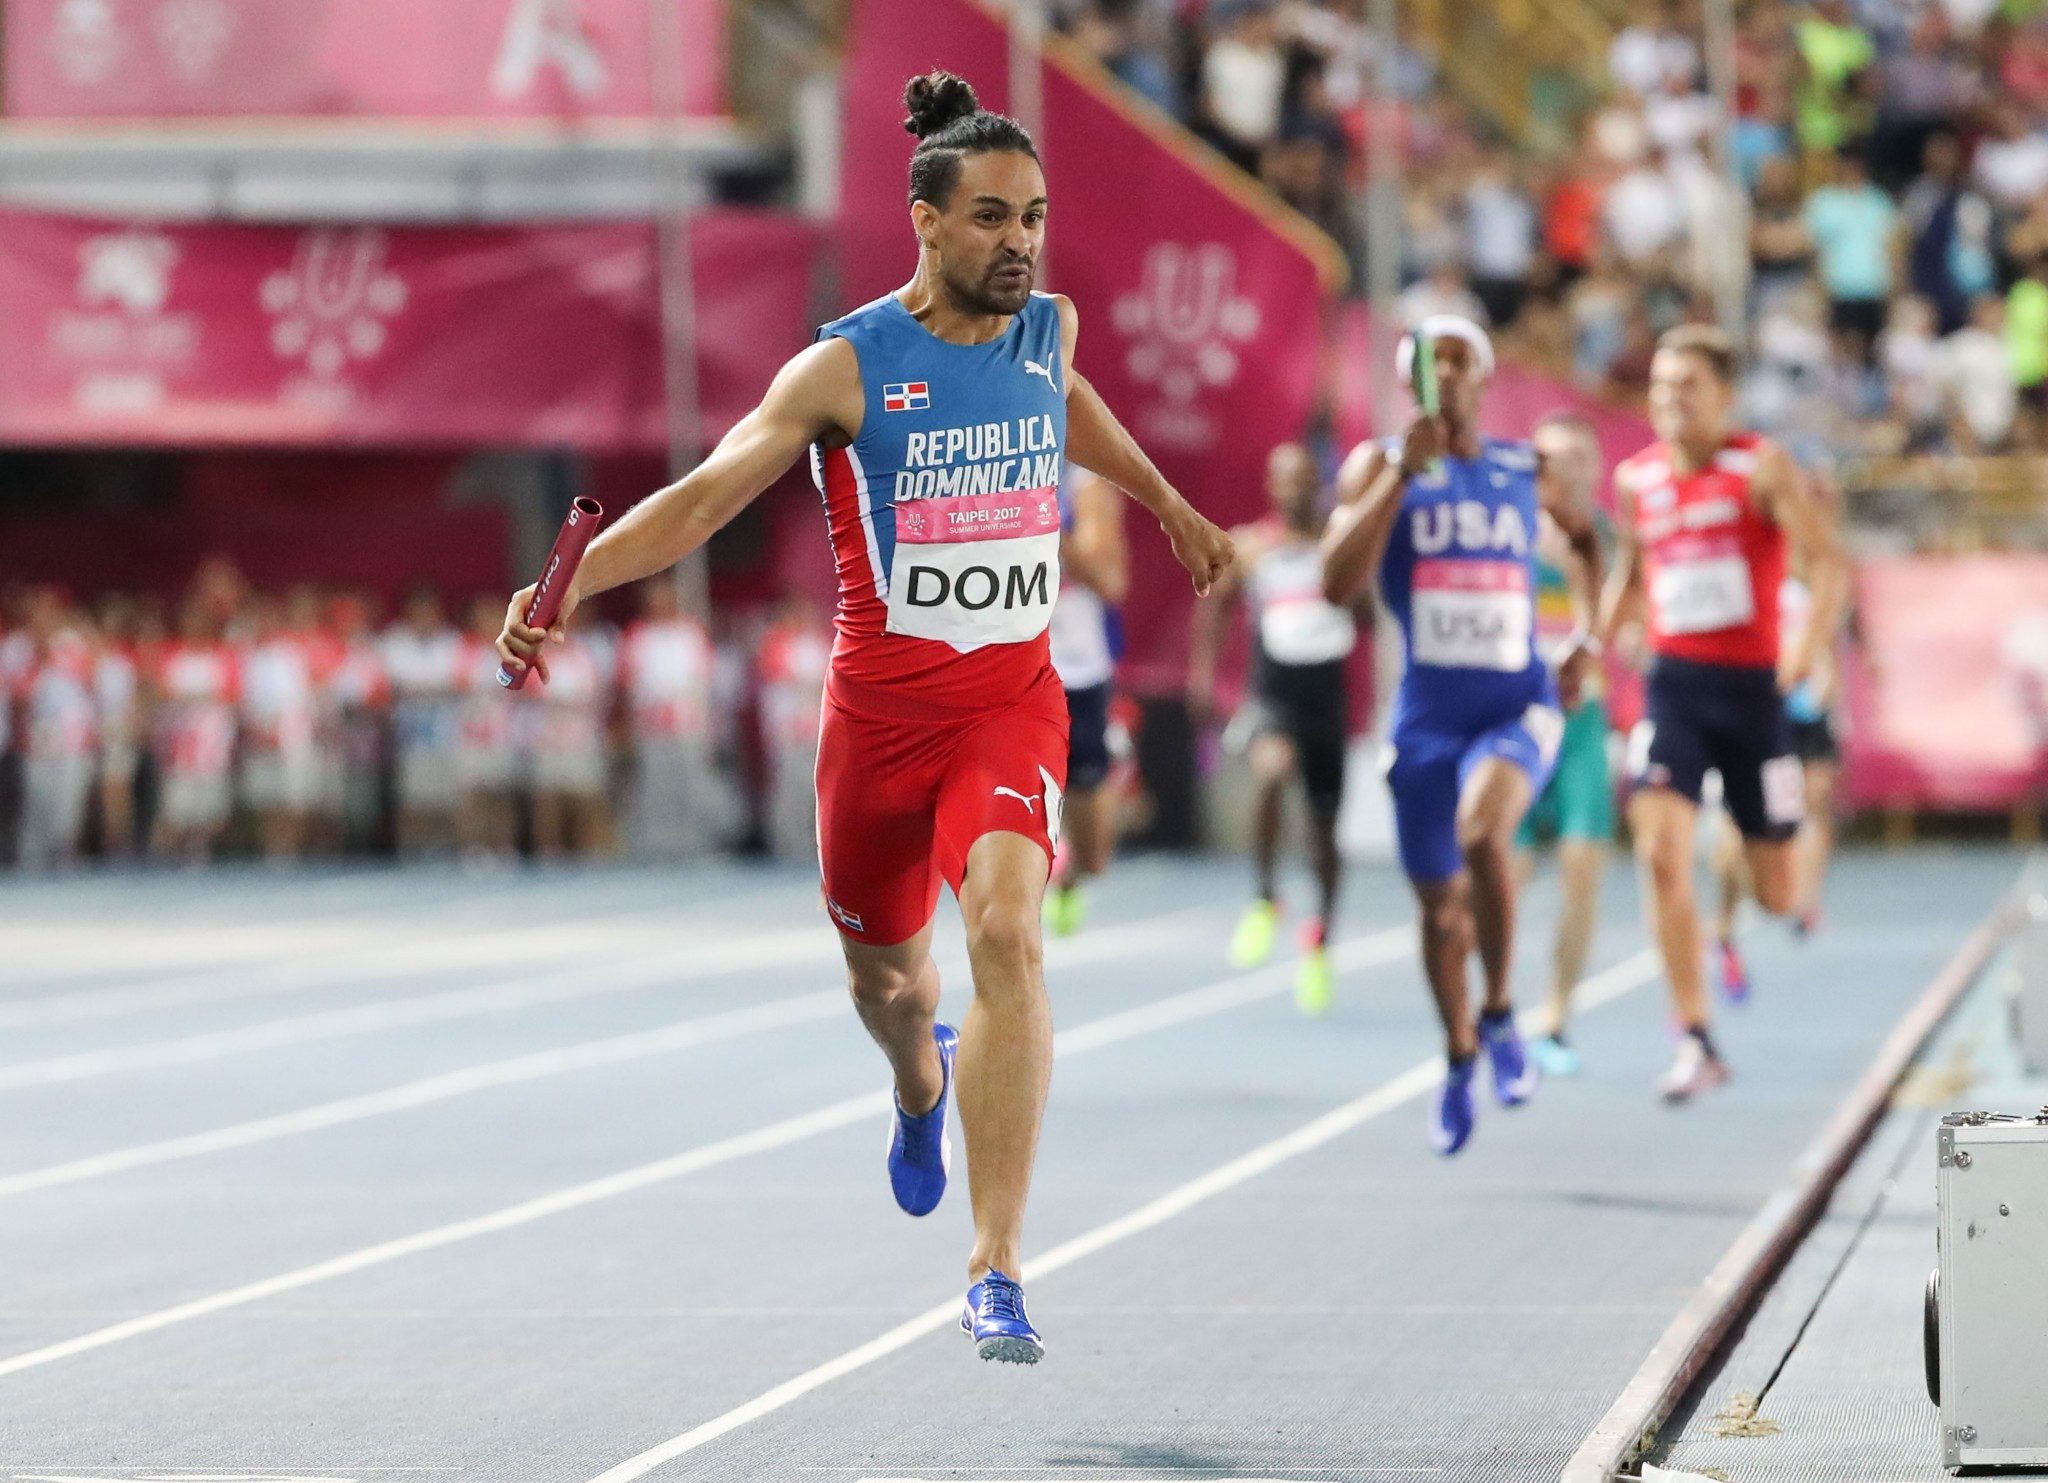 The Dominican Republic stormed to men's 4x400m gold ©Taipei 2017 